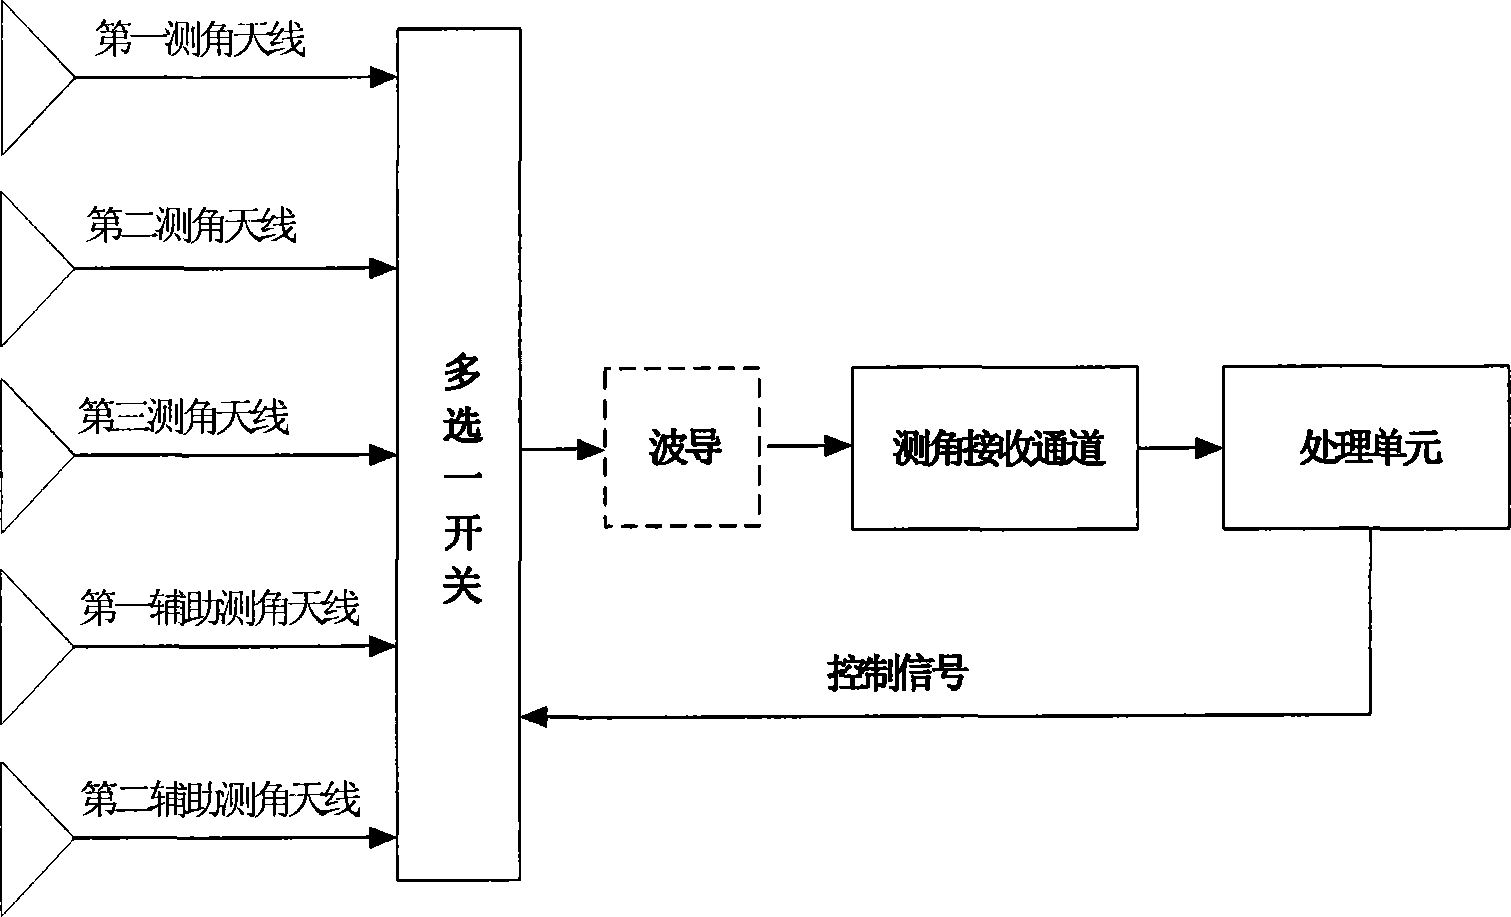 Multi-array-element single-channel interference angle measurement device